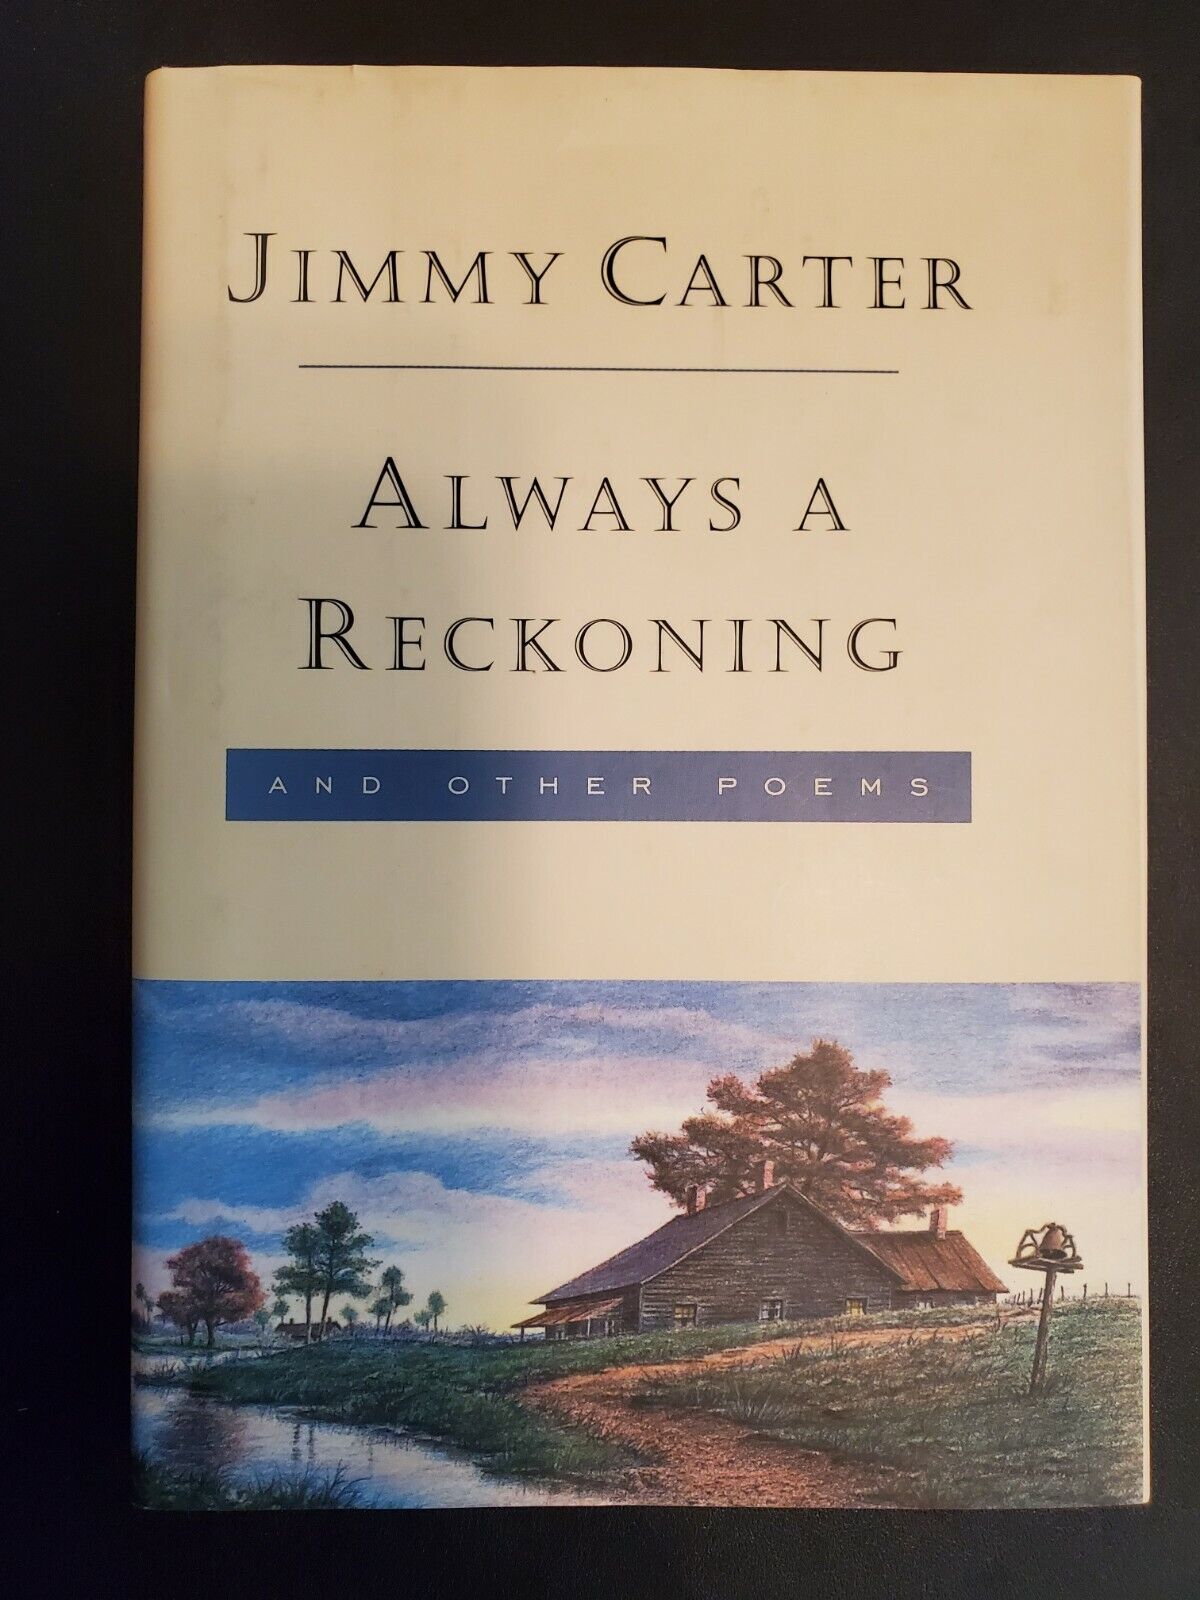 Always a Reckoning and Other Poems by Jimmy Carter (1994, Hardcover)